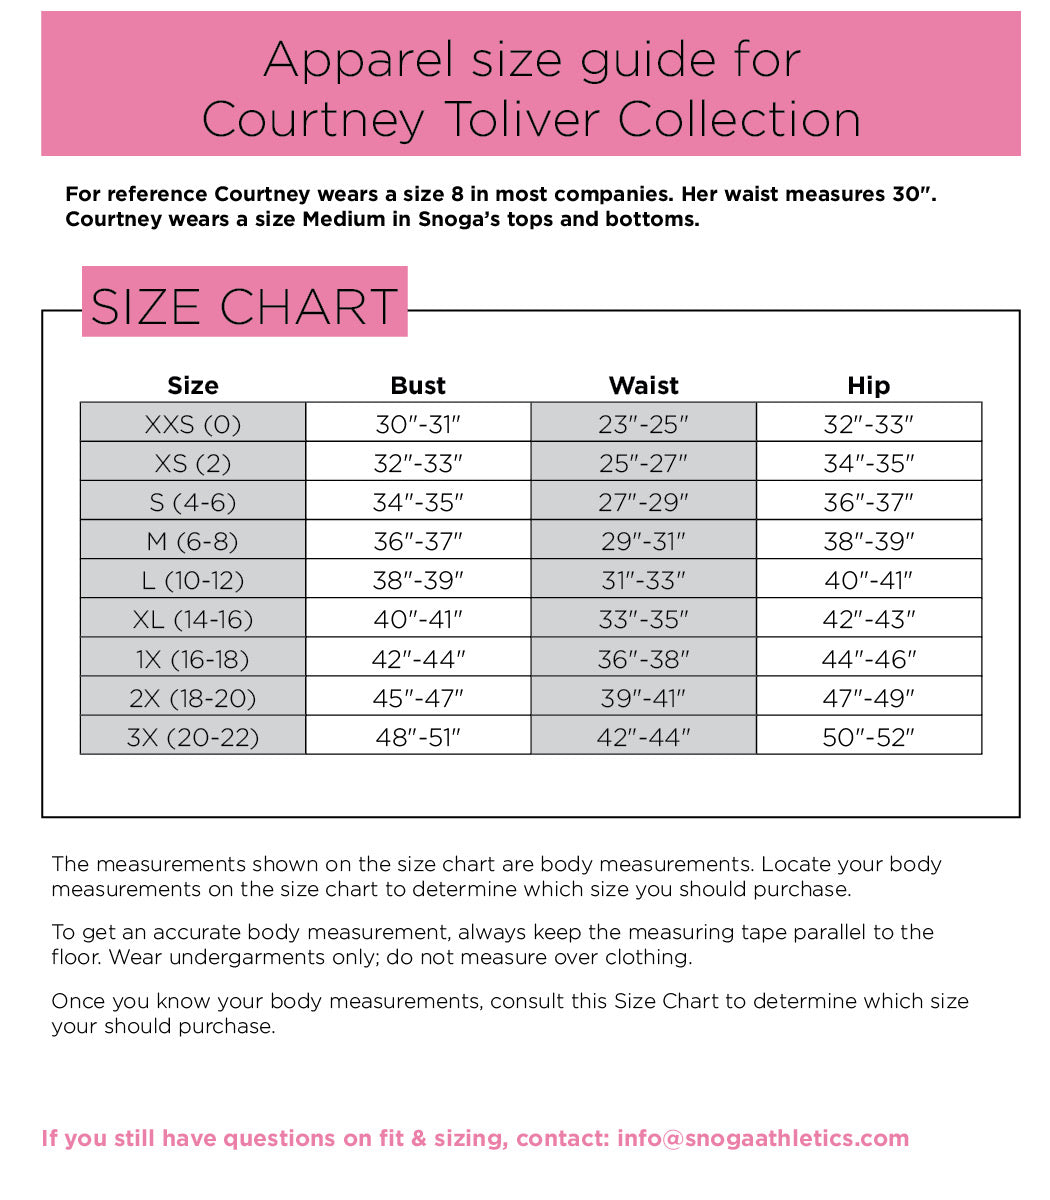 Courtney Toliver Collection Size Chart